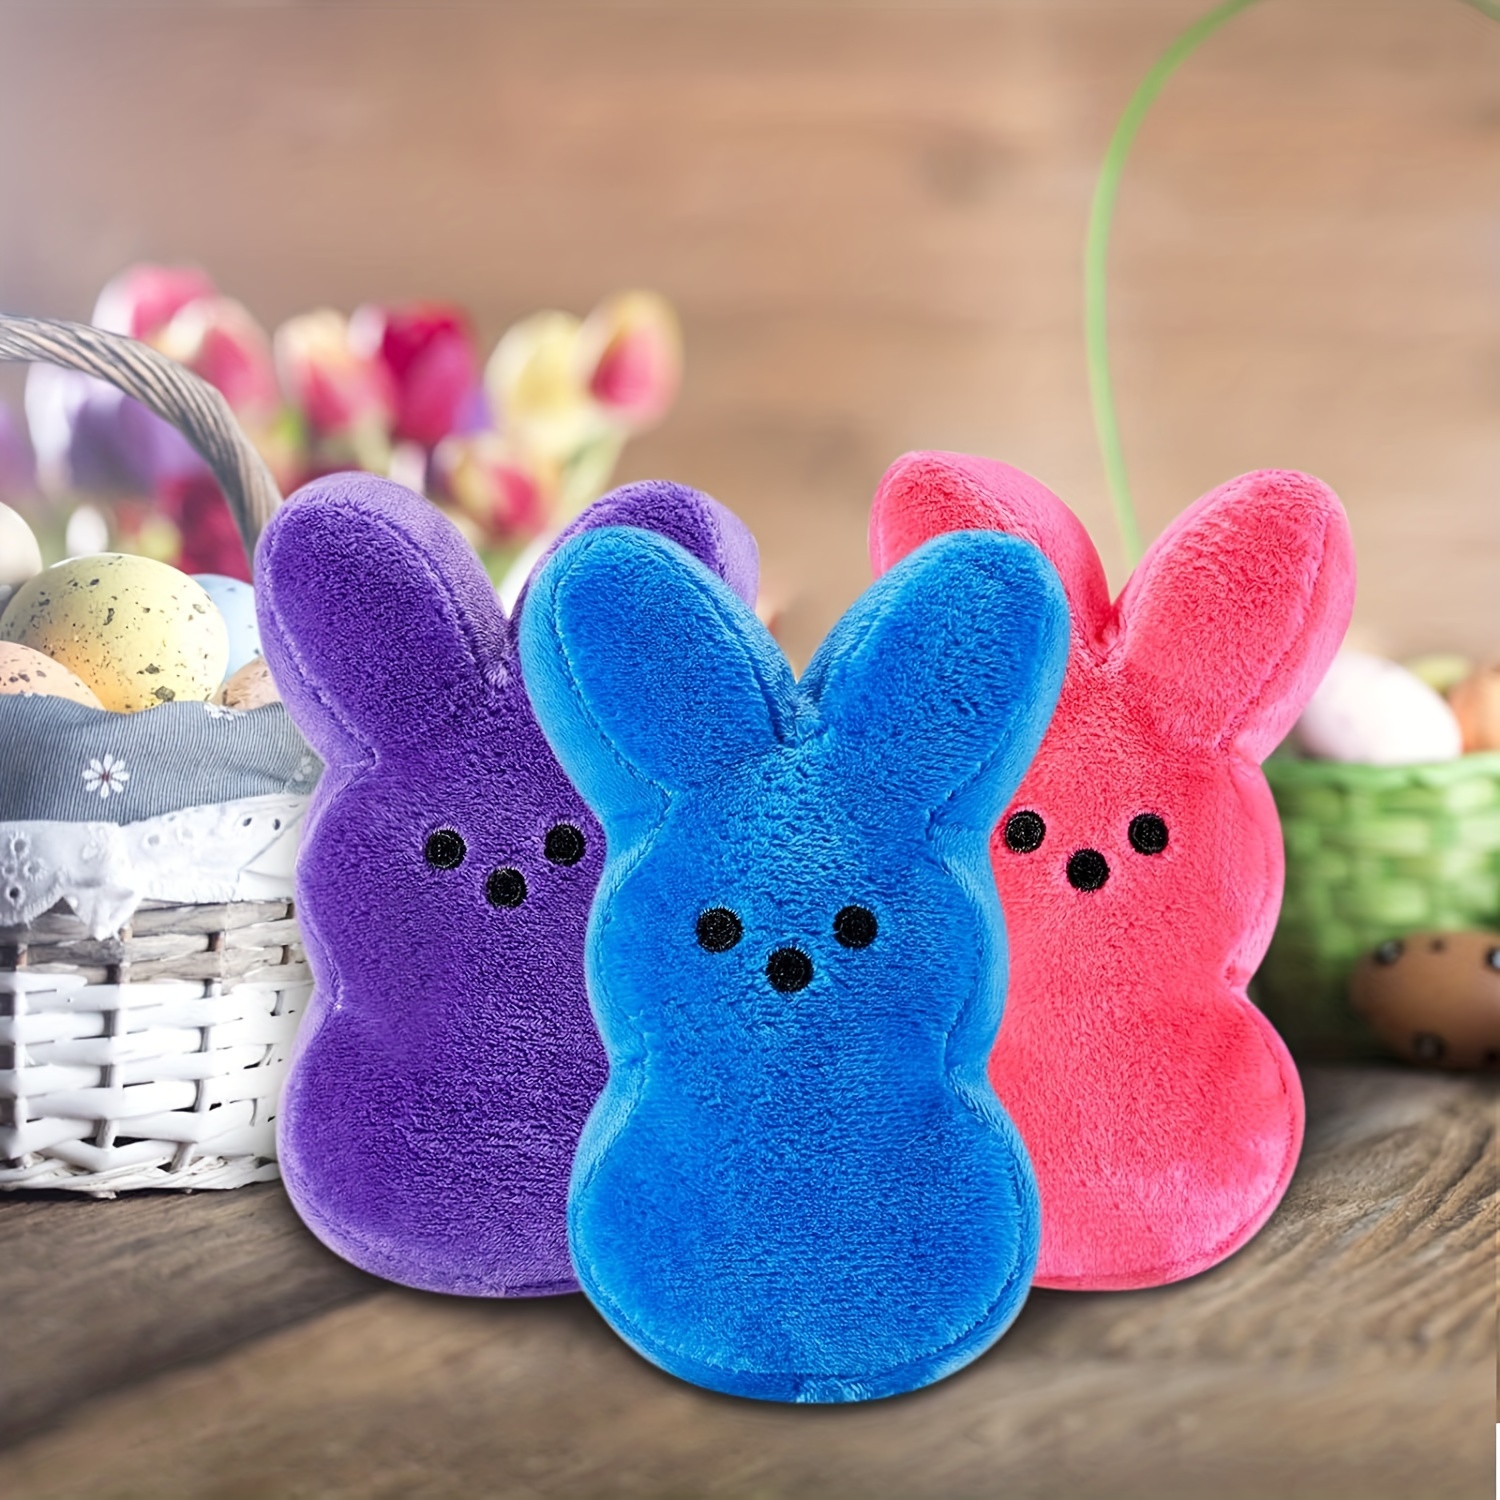 2 5pcs easter cute stuffed animal rabbit stuffed doll toys school season class gifts easter egg basket stuffing party birthday best gift to each other multi color mixed hair